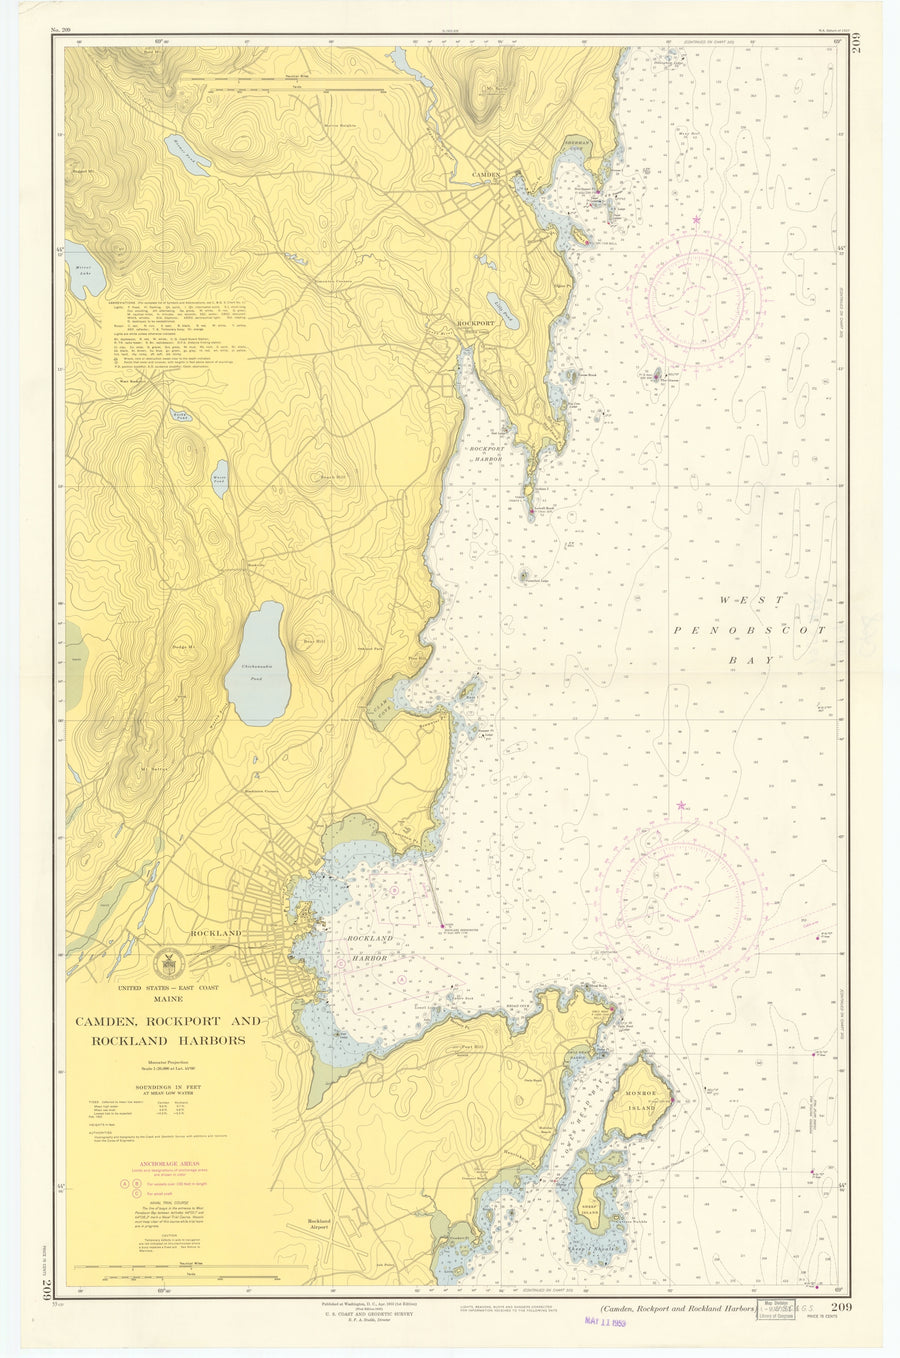 Camden, Rockport and Rockland Harbors Map 1953